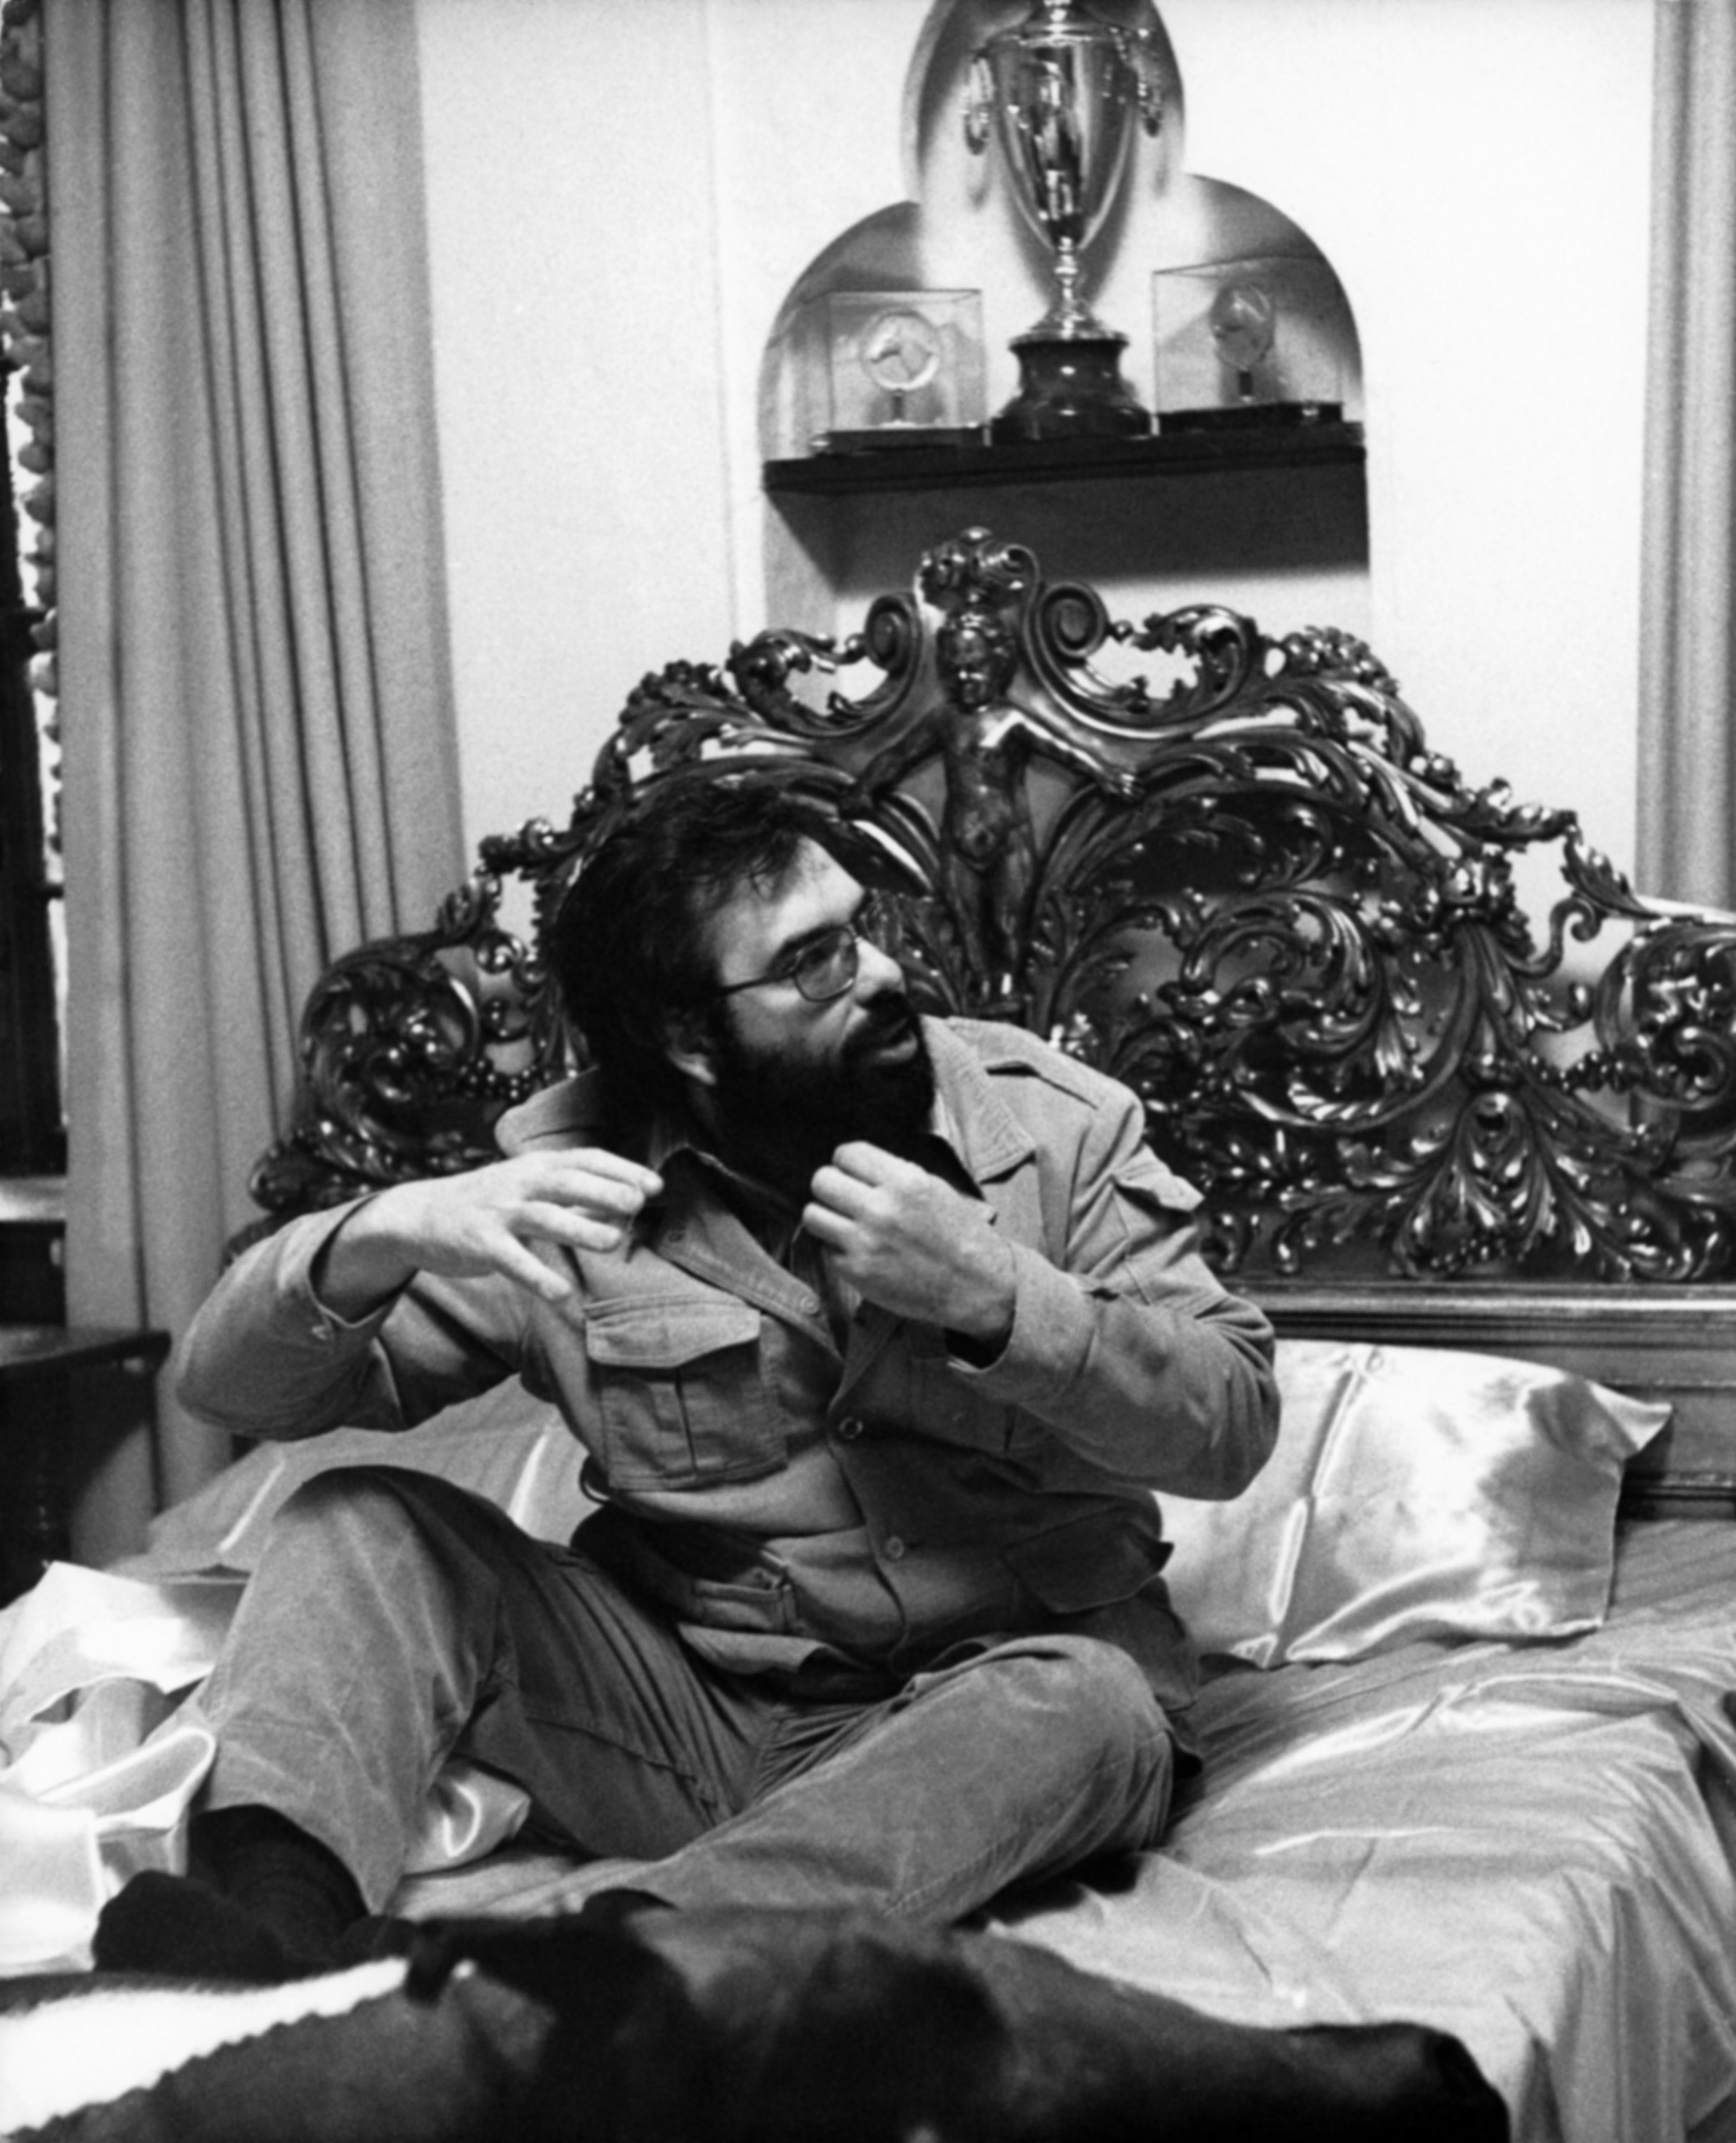 Francis Ford Coppola in a detailed ornate bed, adjusting his beard